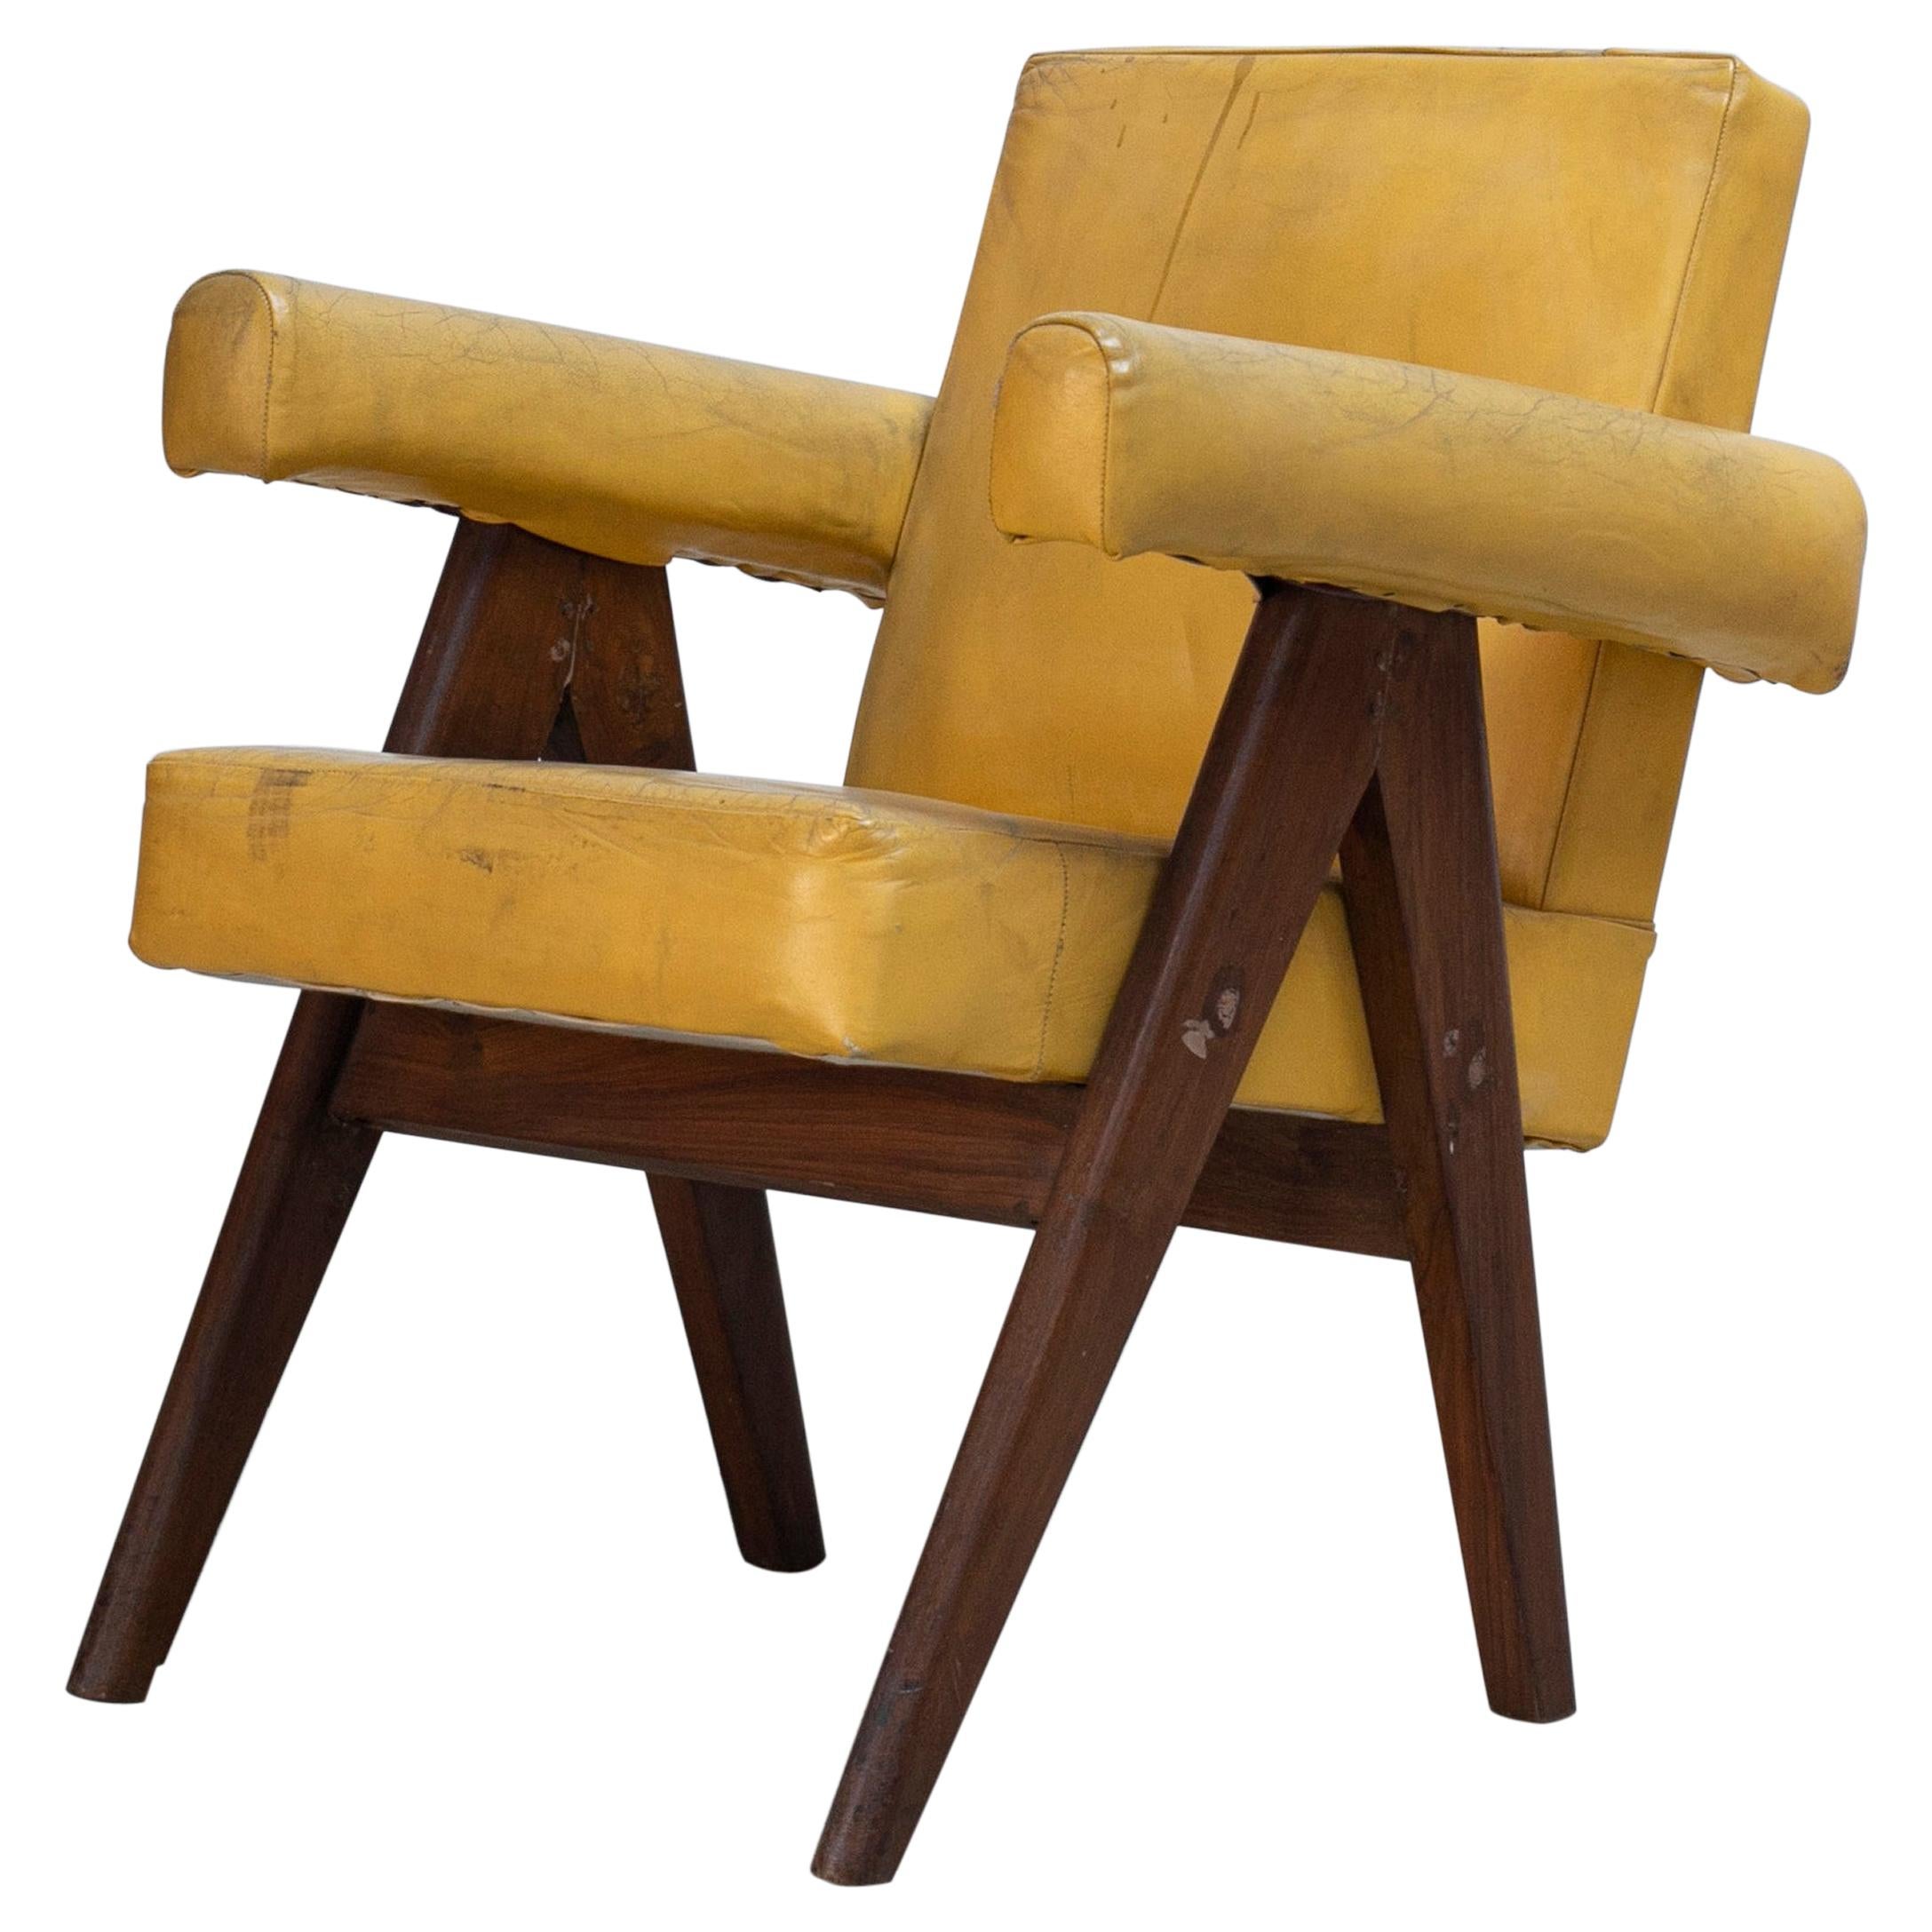 Pierre Jeanneret Committee Chair, 1950s, Chandigarh